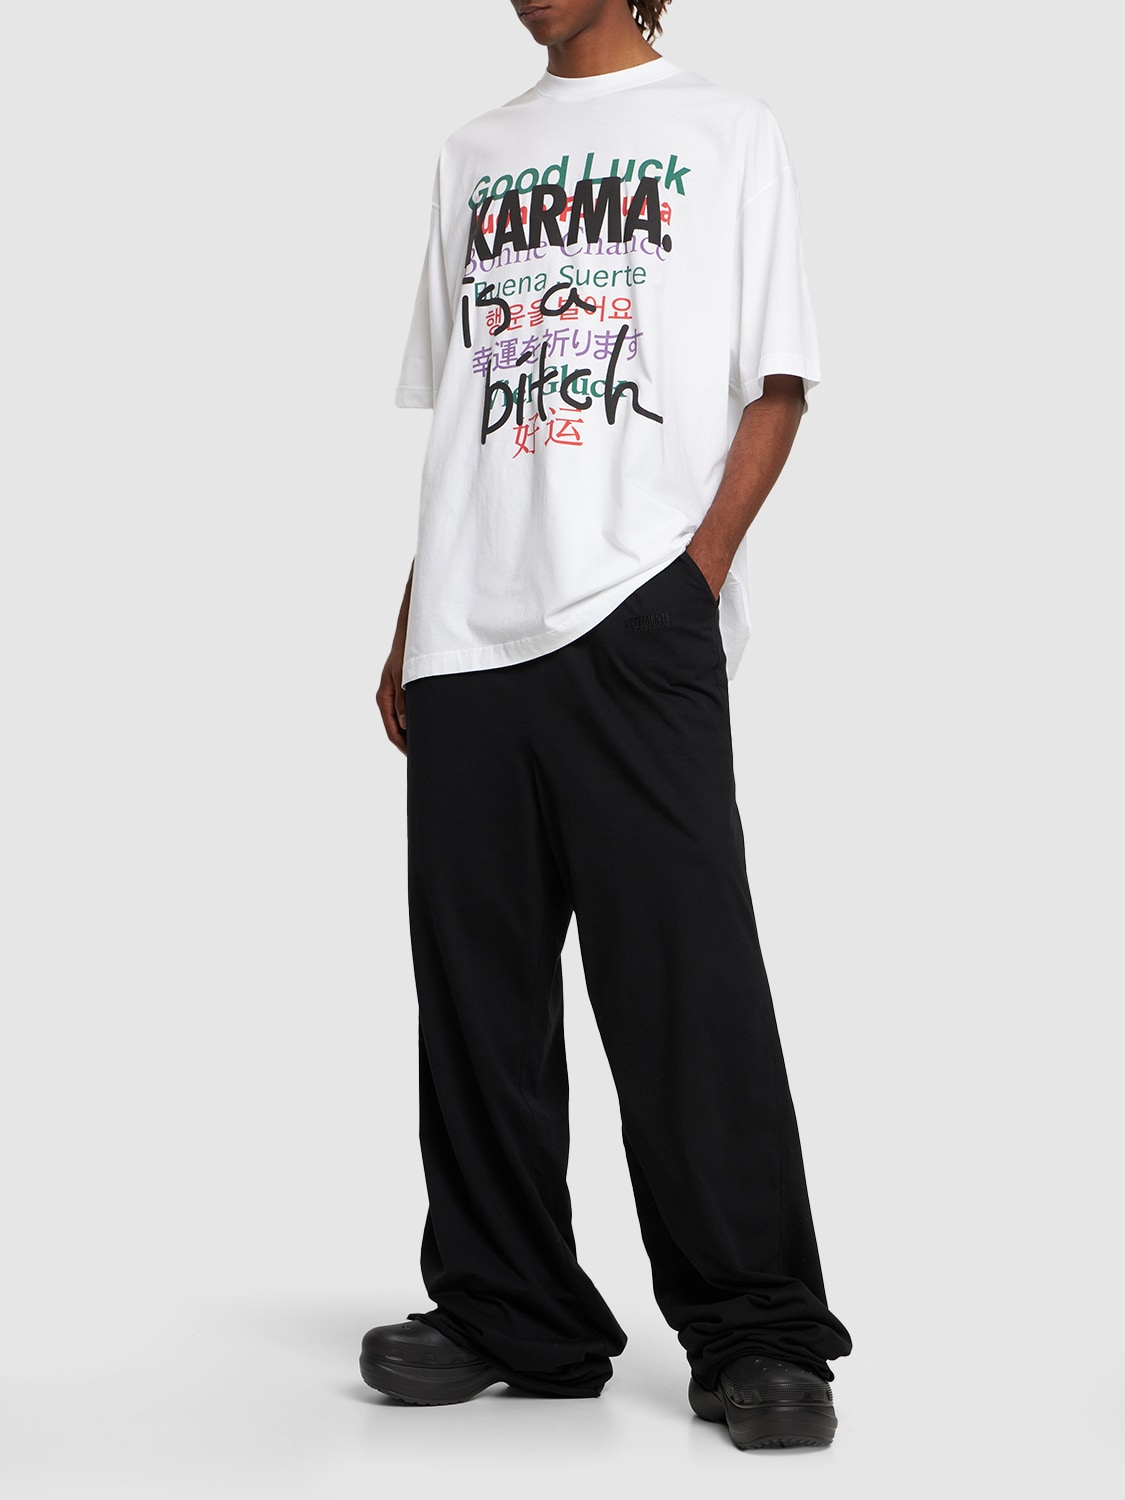 Shop Vetements Good Luck Karma Printed Cotton T-shirt In White